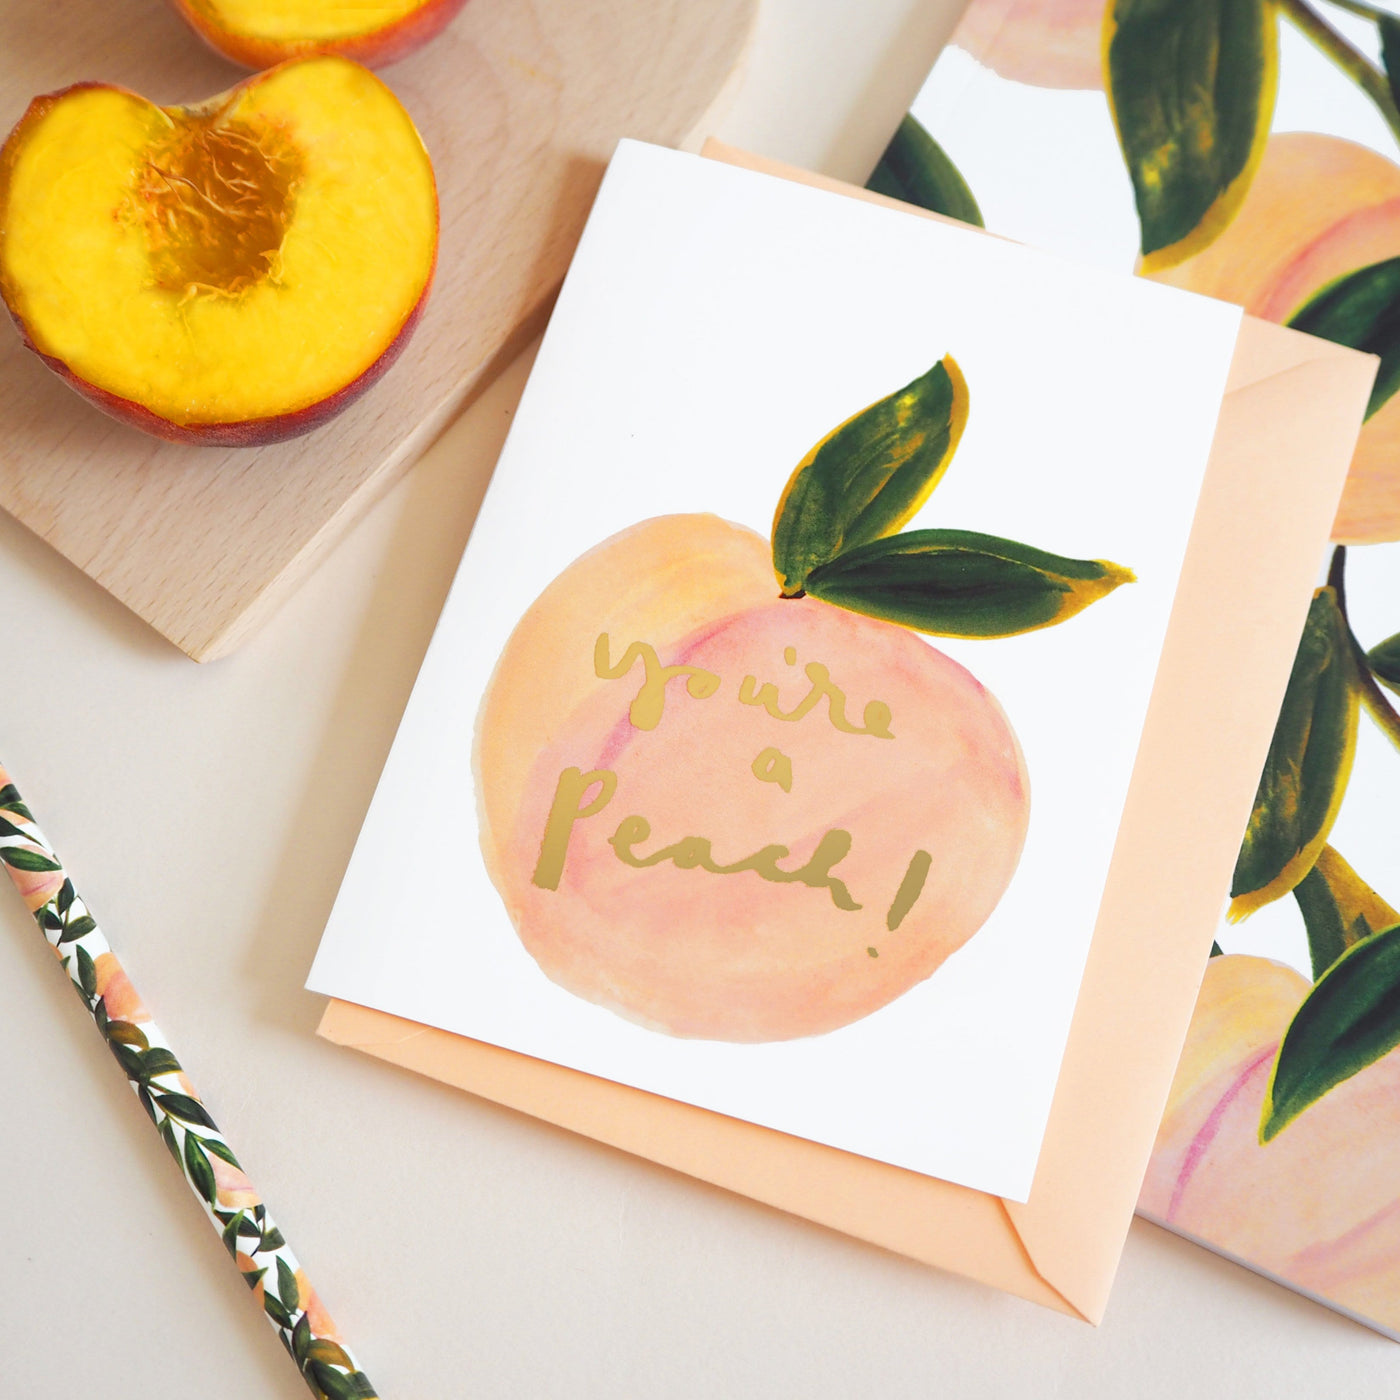 An Illustrated Care With A Peach And Green Leaf With The Words You're A Peach In Gold With A Peach Envelope Next To Real Peaches On A Wooden Board - Annie Dornan Smith